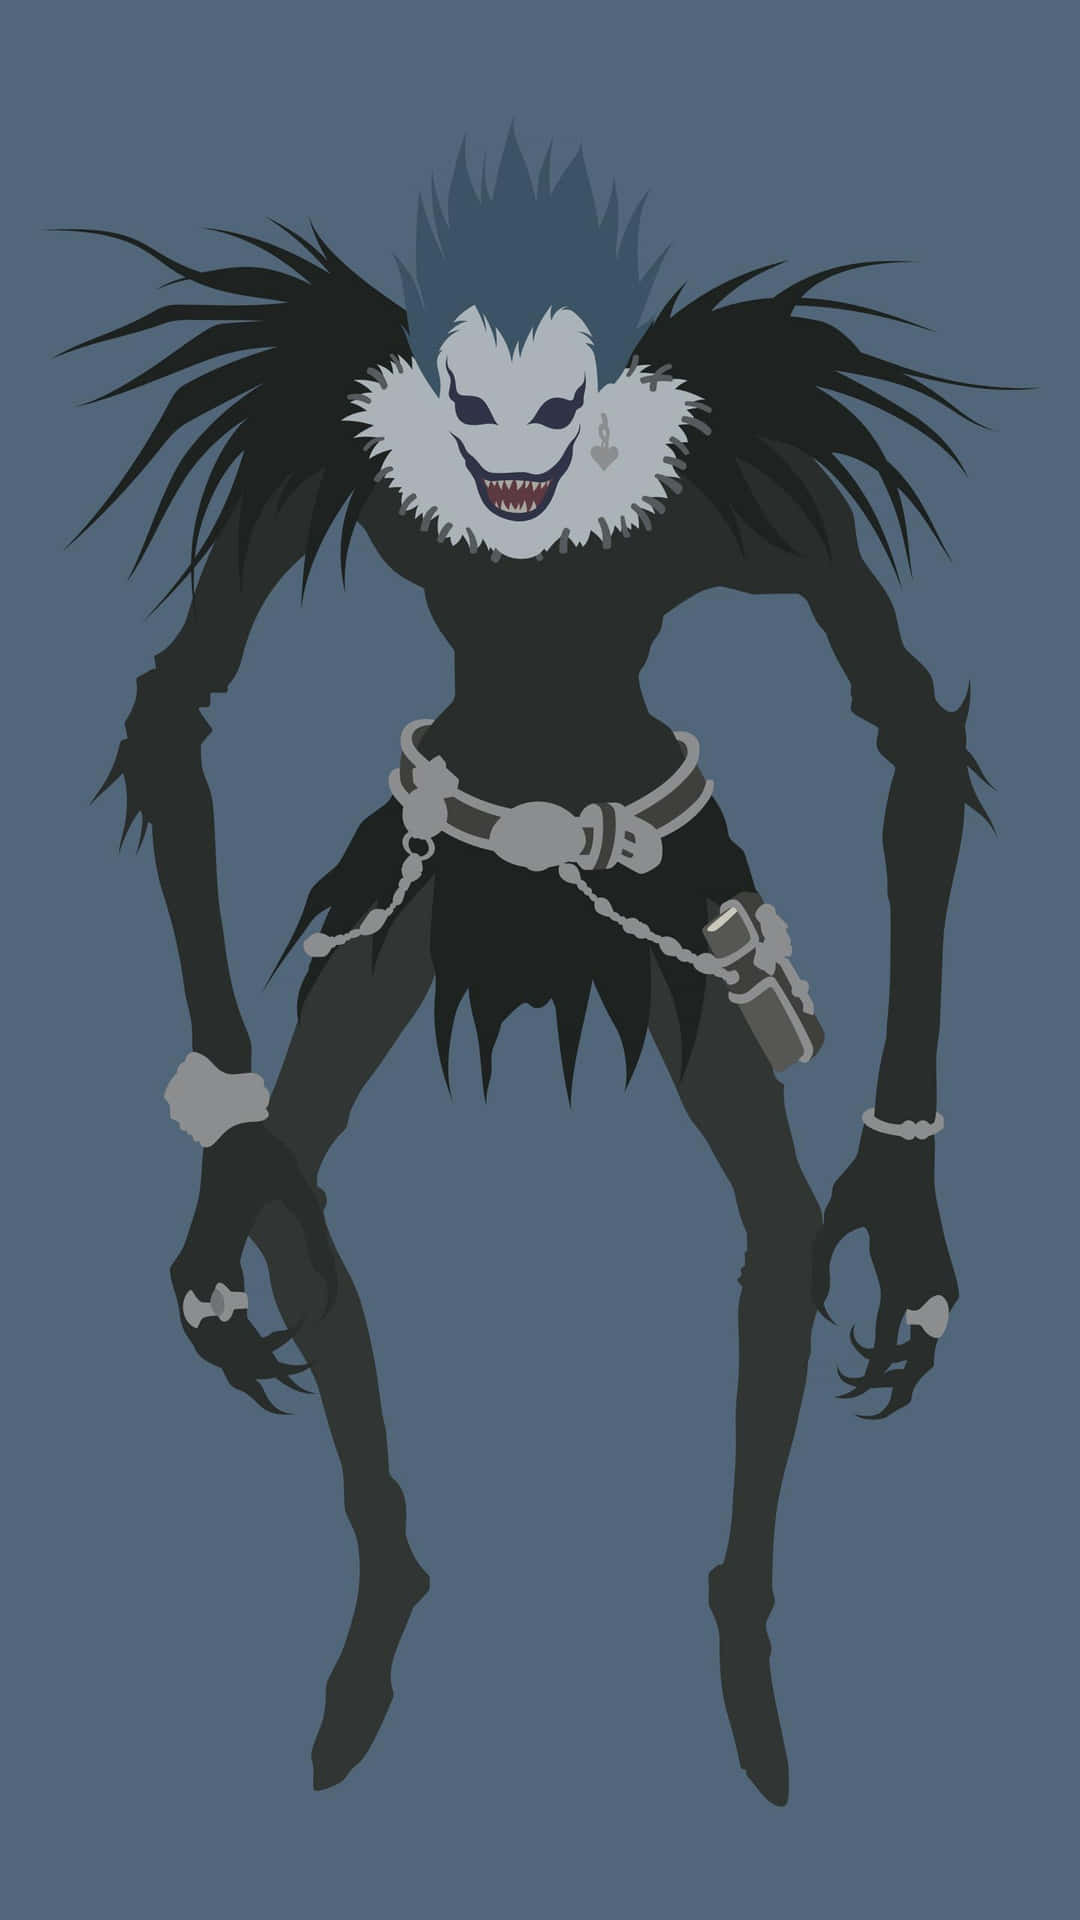 Ryuk Death Note Character Silhouette Wallpaper